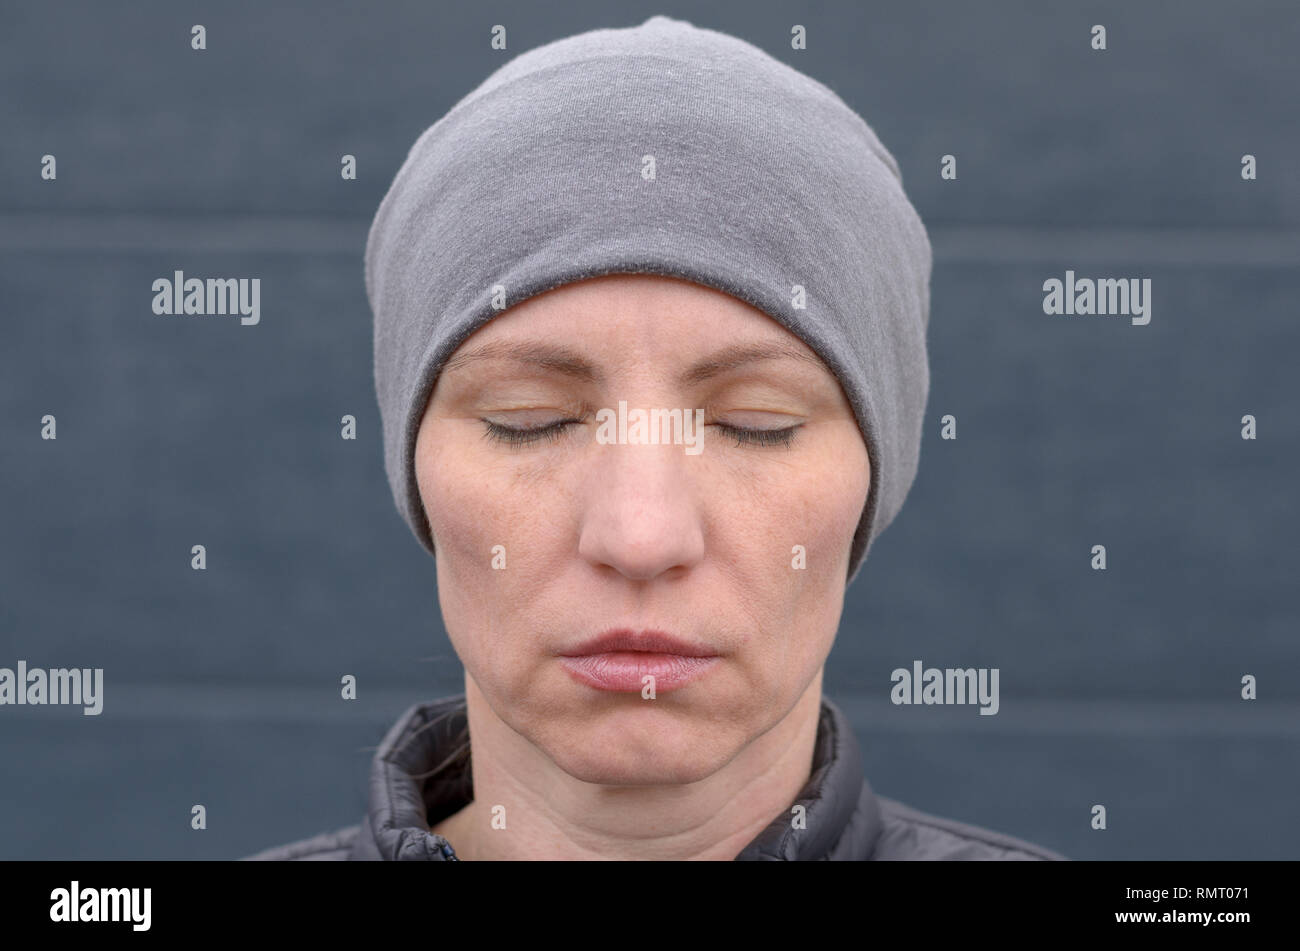 Calm unemotional woman wearing a grey knitted cap with closed eyes and a serene expression in a close up head shot Stock Photo